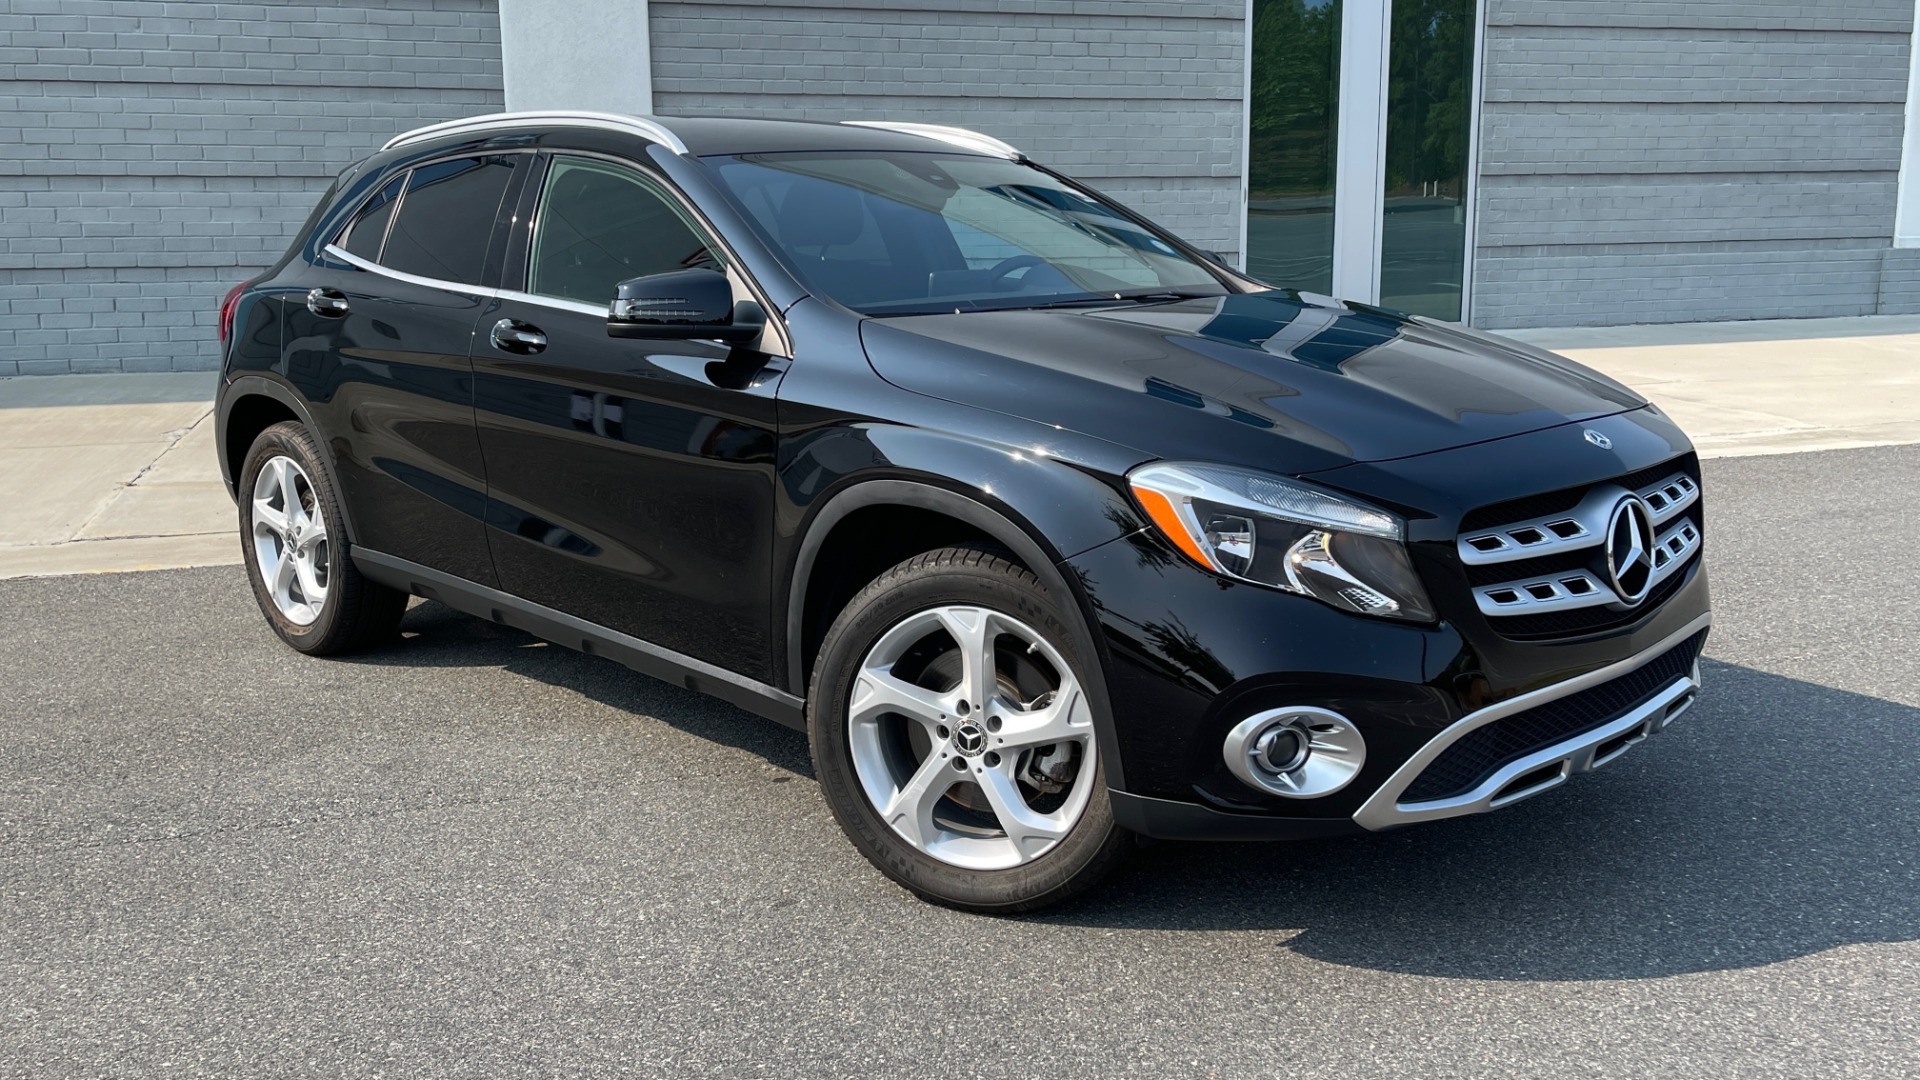 Used 2018 Mercedes-Benz GLA 250 SUV / GARMIN MAP PILOT / 18IN WHEELS / REARVIEW for sale Sold at Formula Imports in Charlotte NC 28227 4